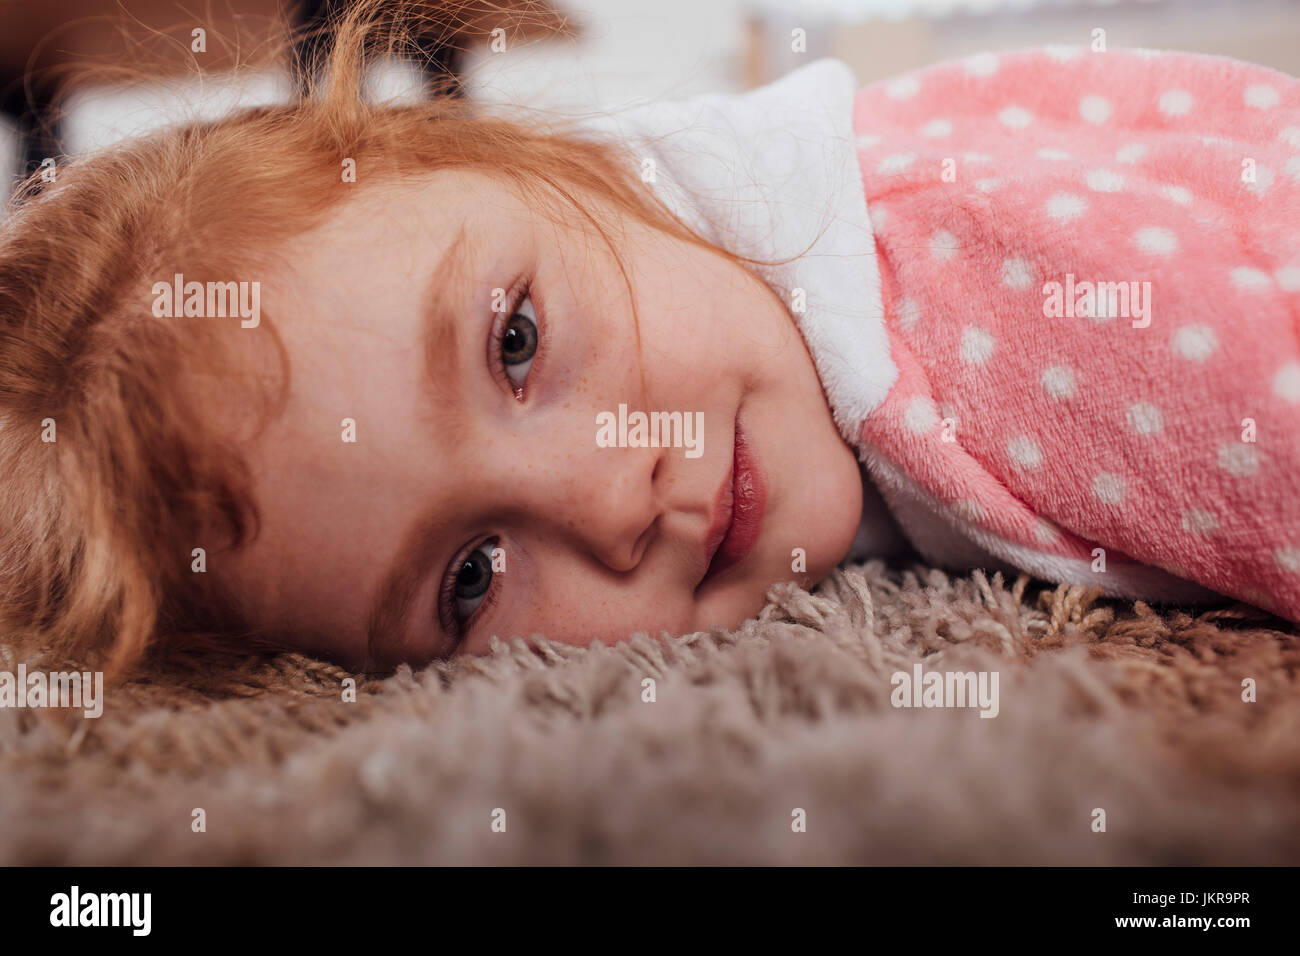 Close-up portrait of girl lying on carpet at home Stock Photo